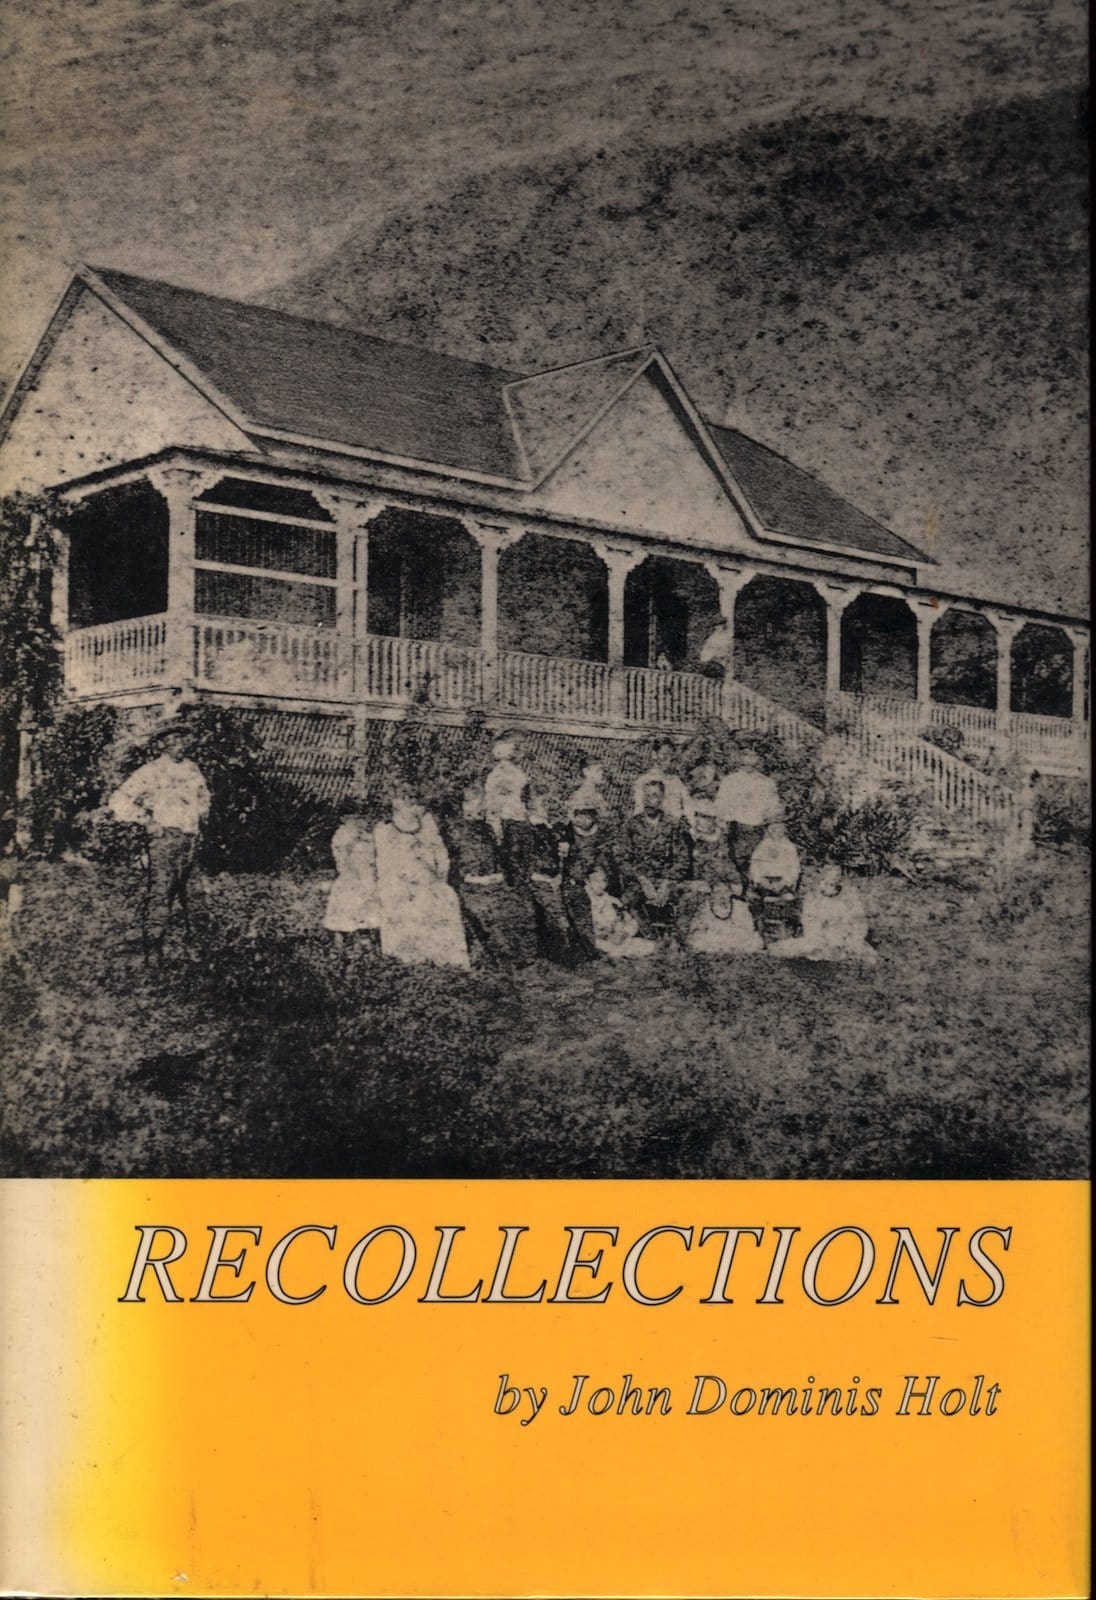 Recollections: Memoirs of John Dominis Holt, 1919-1935